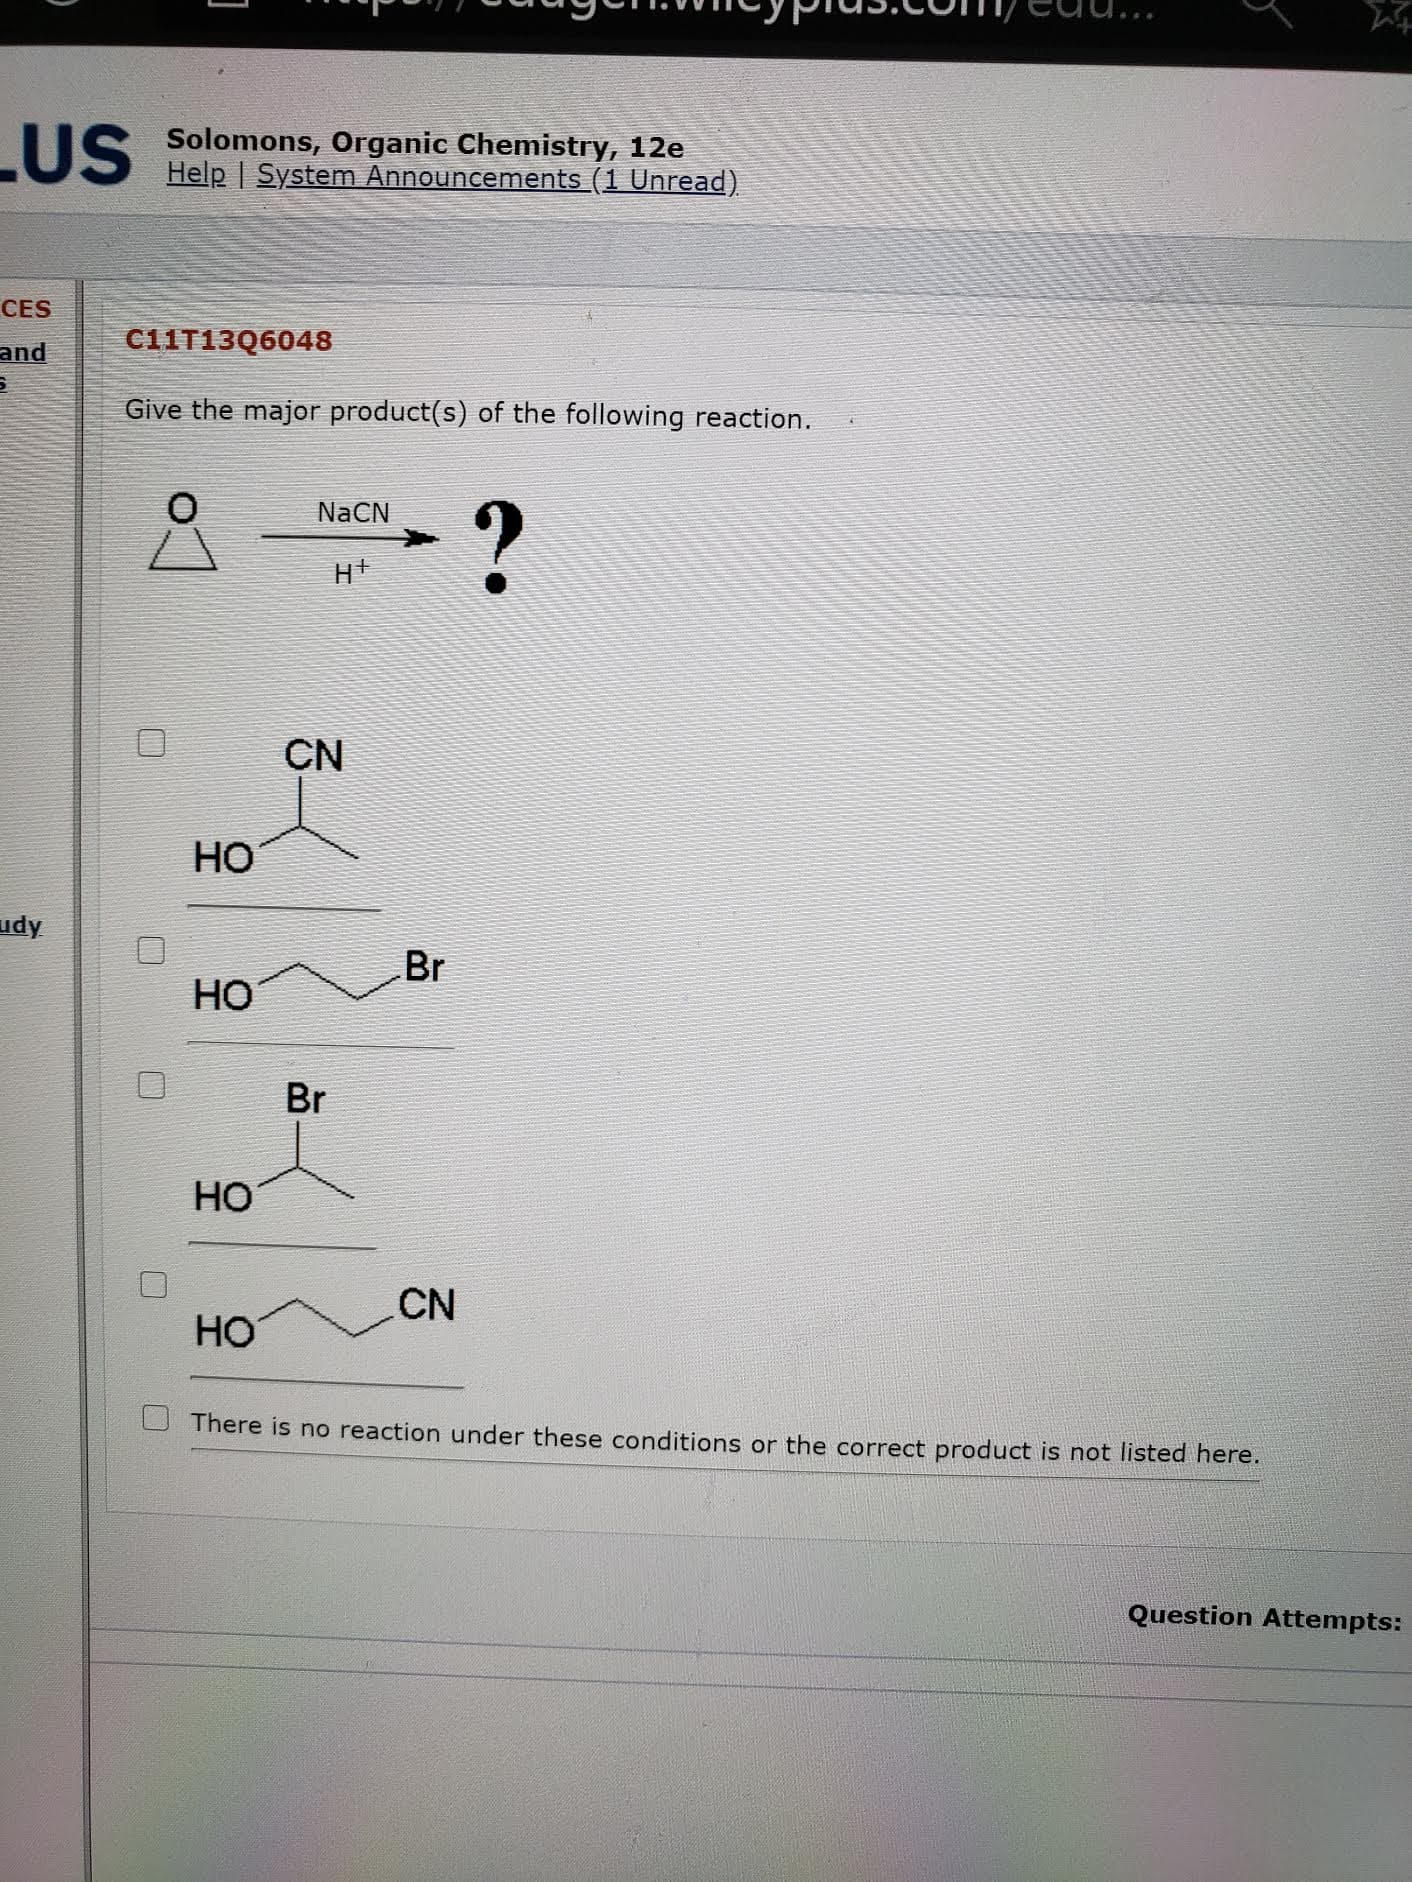 Give the major product(s) of the following reaction.
NaCN
CN
НО
Br
HO
Br
Но
CN
HO
There is no reaction under these conditions or the correct product is not listed here.
